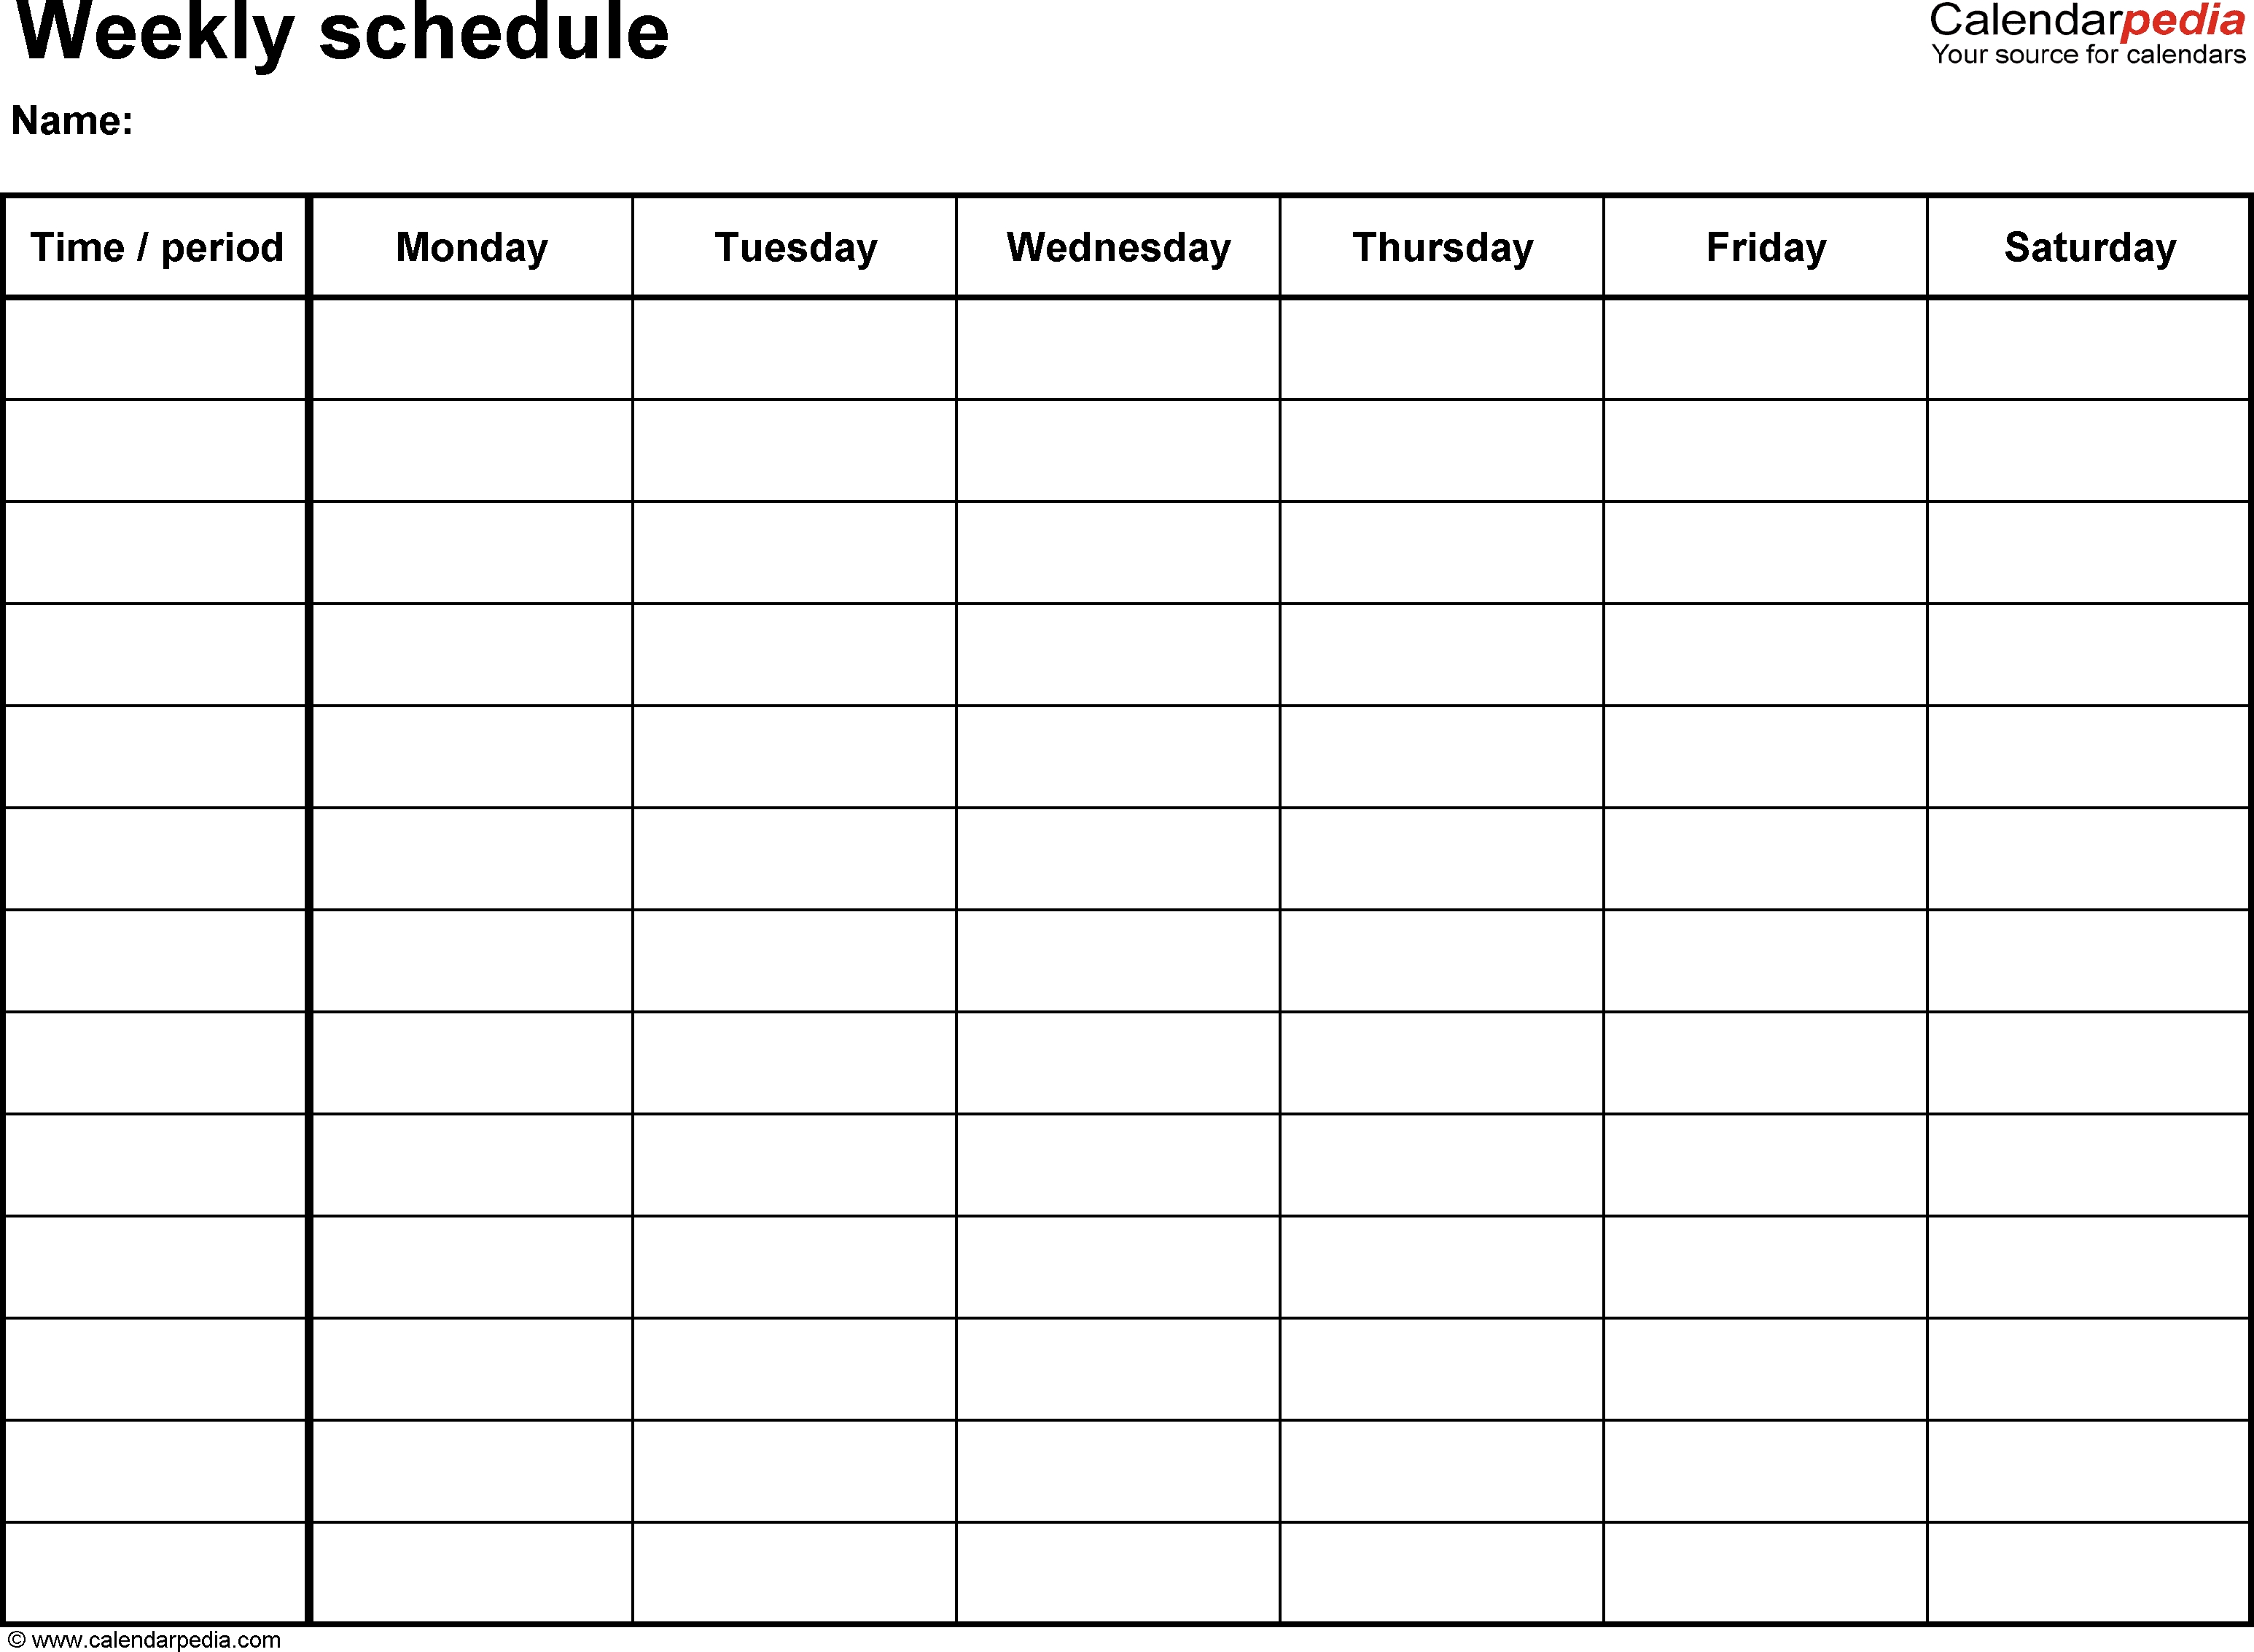 Free Weekly Schedule Templates For Word - 18 Templates pertaining to Weekly Calendar Template With Times